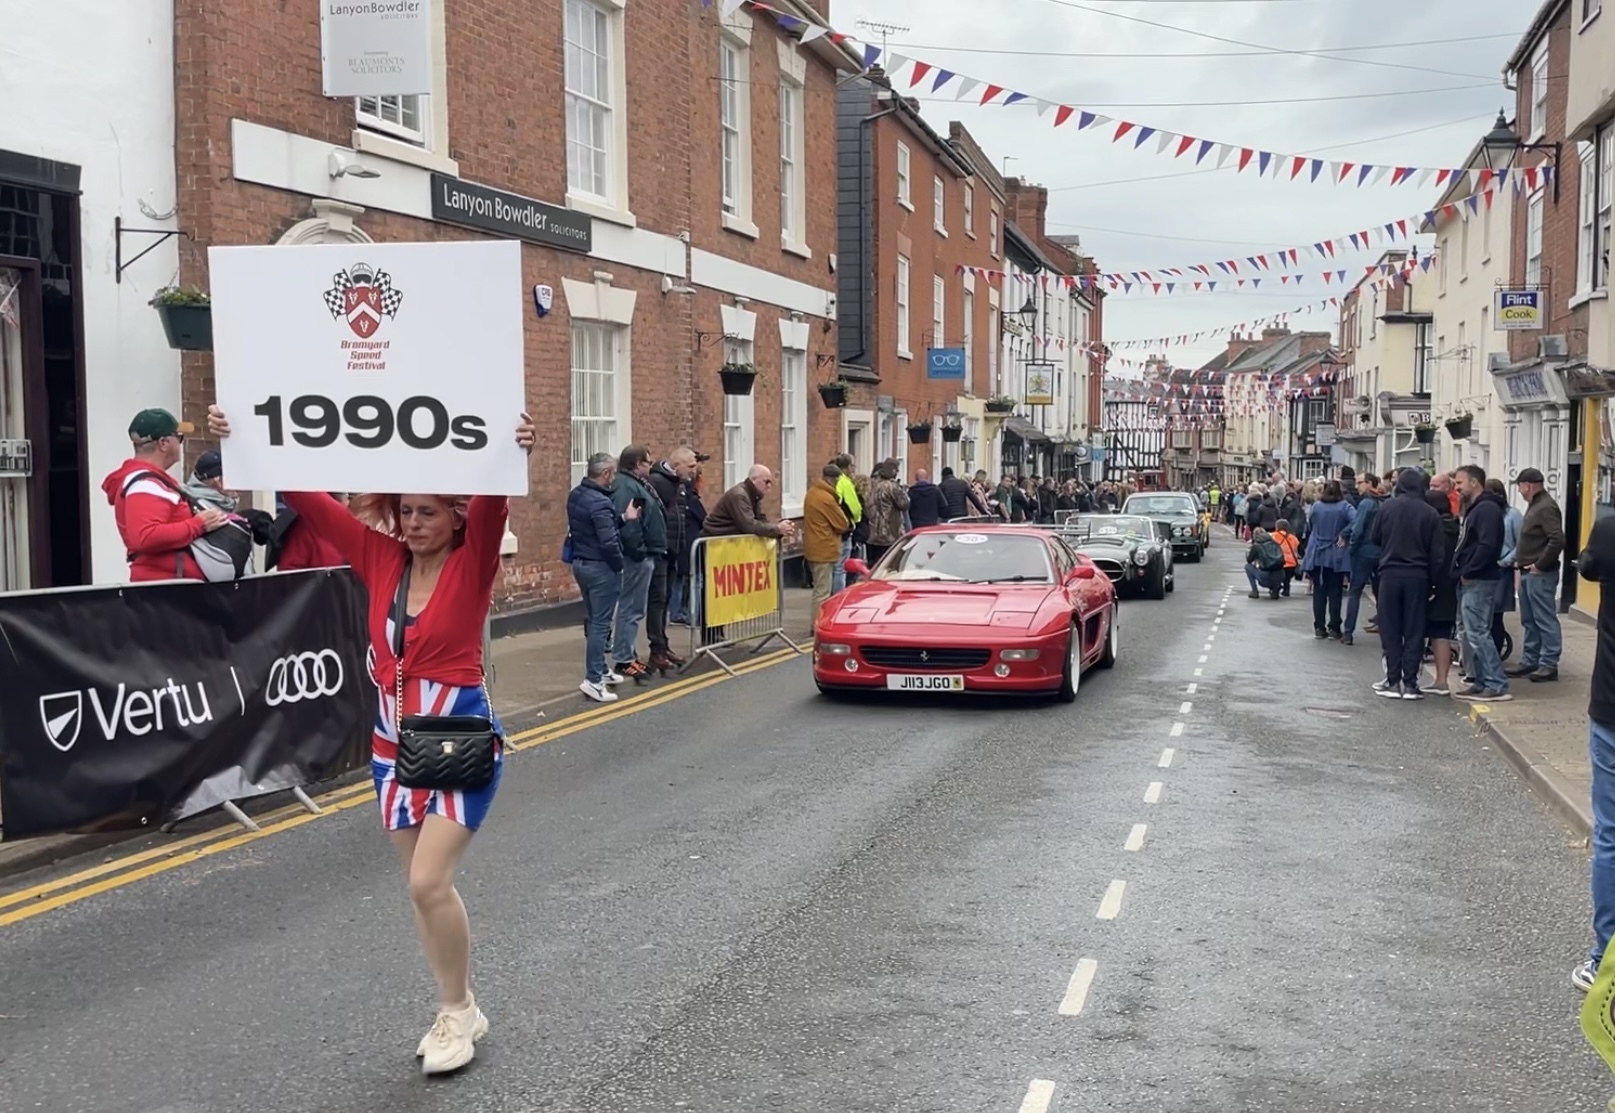 Bromyard Speed Festival 2022: Some of the events top cars from the 1970s, including Toyota and Rolls Royce